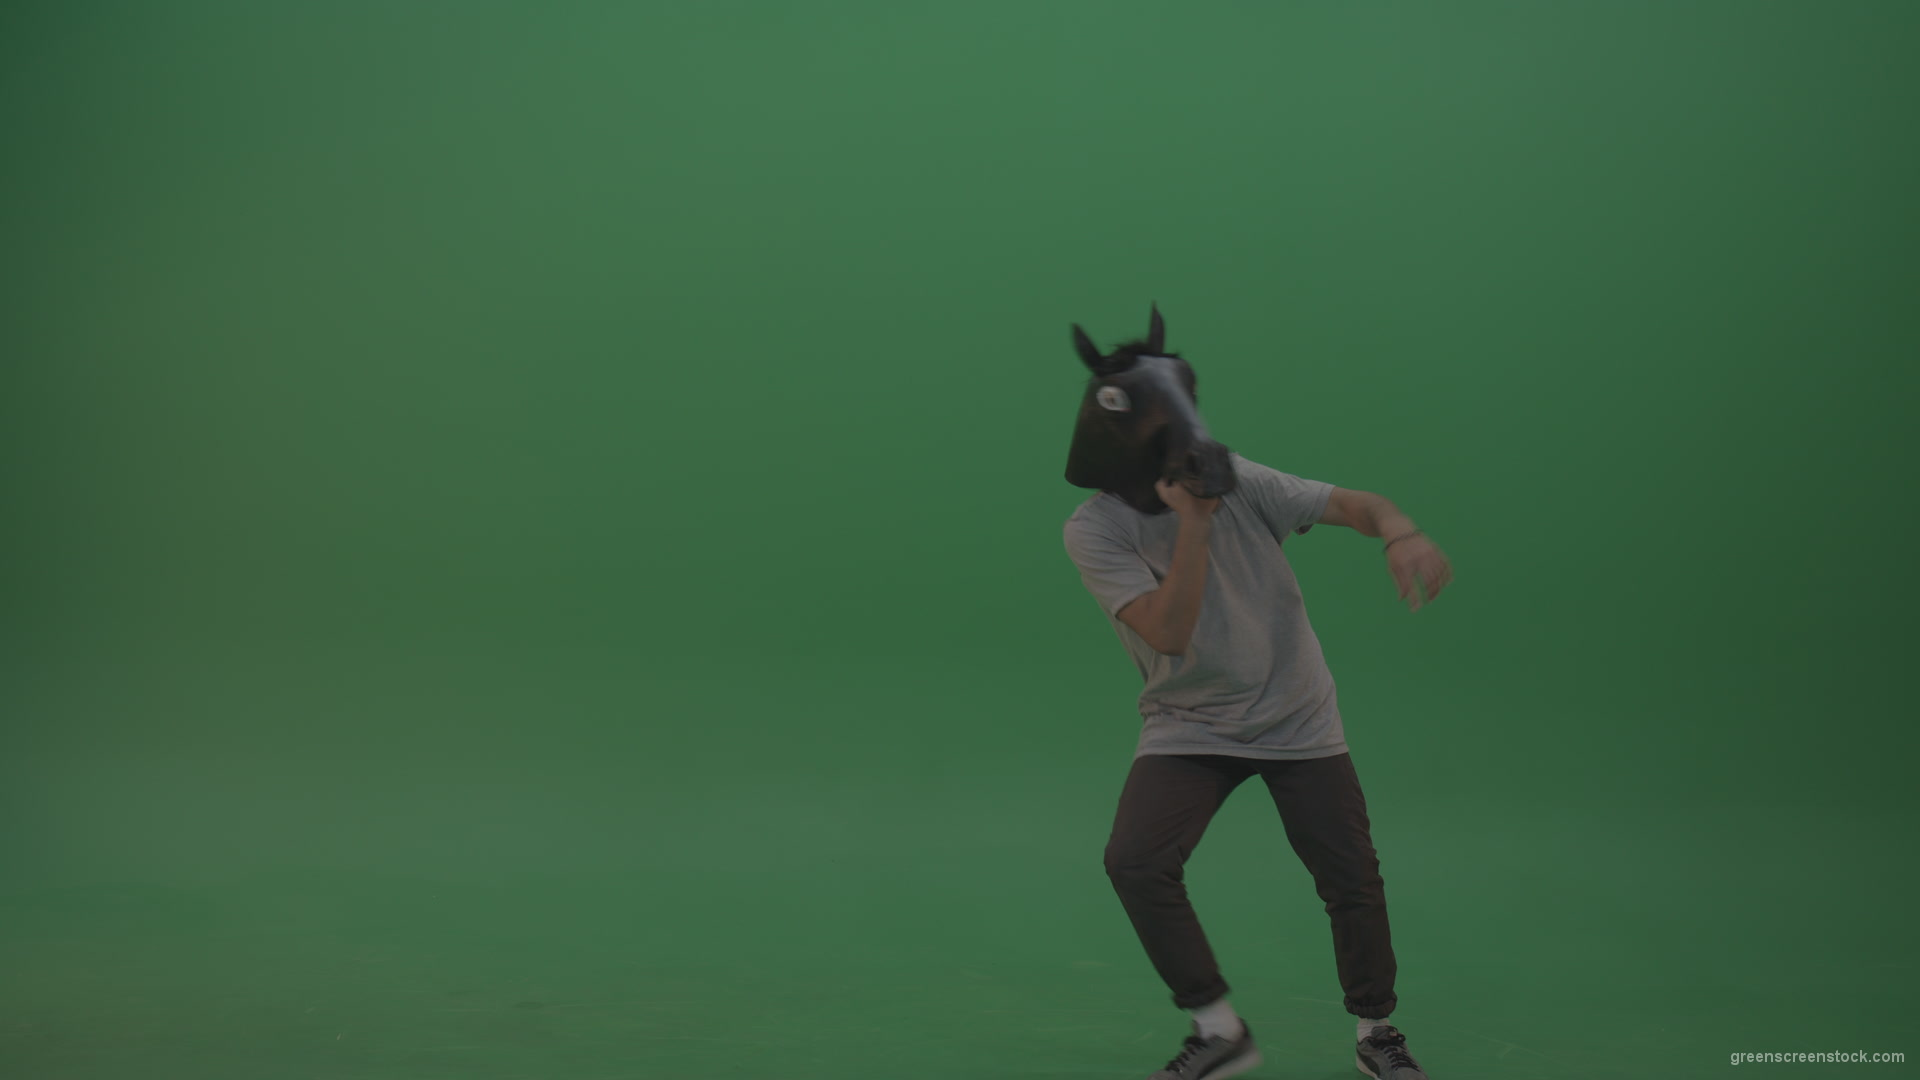 Boy-in-grey-wear-and-horse-head-costume-dances-over-green-screen-background_008 Green Screen Stock